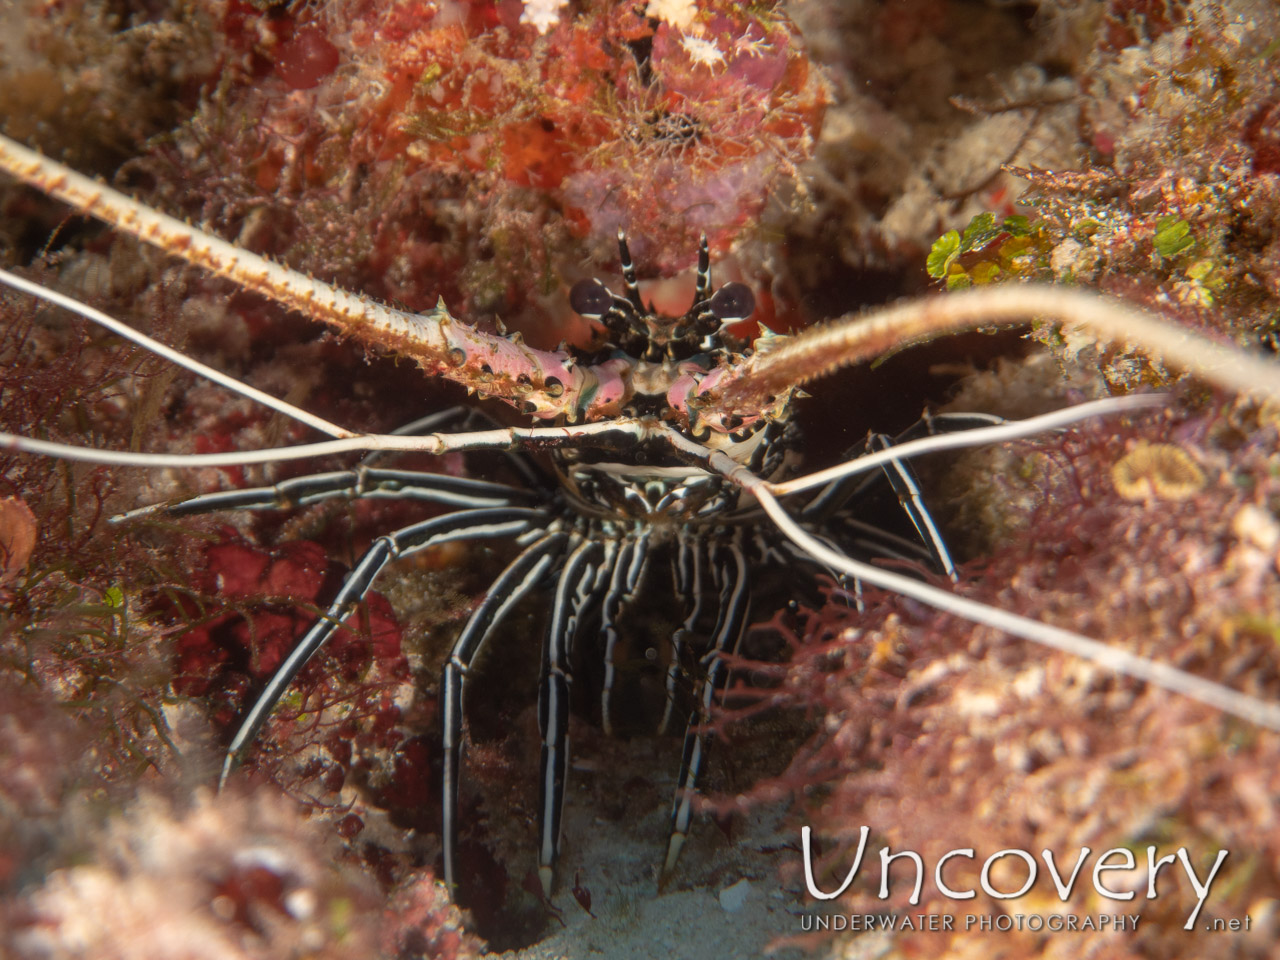 Painted Spiny Lobster (panulirus Versicolor), photo taken in Maldives, Male Atoll, South Male Atoll, Bushi Corner